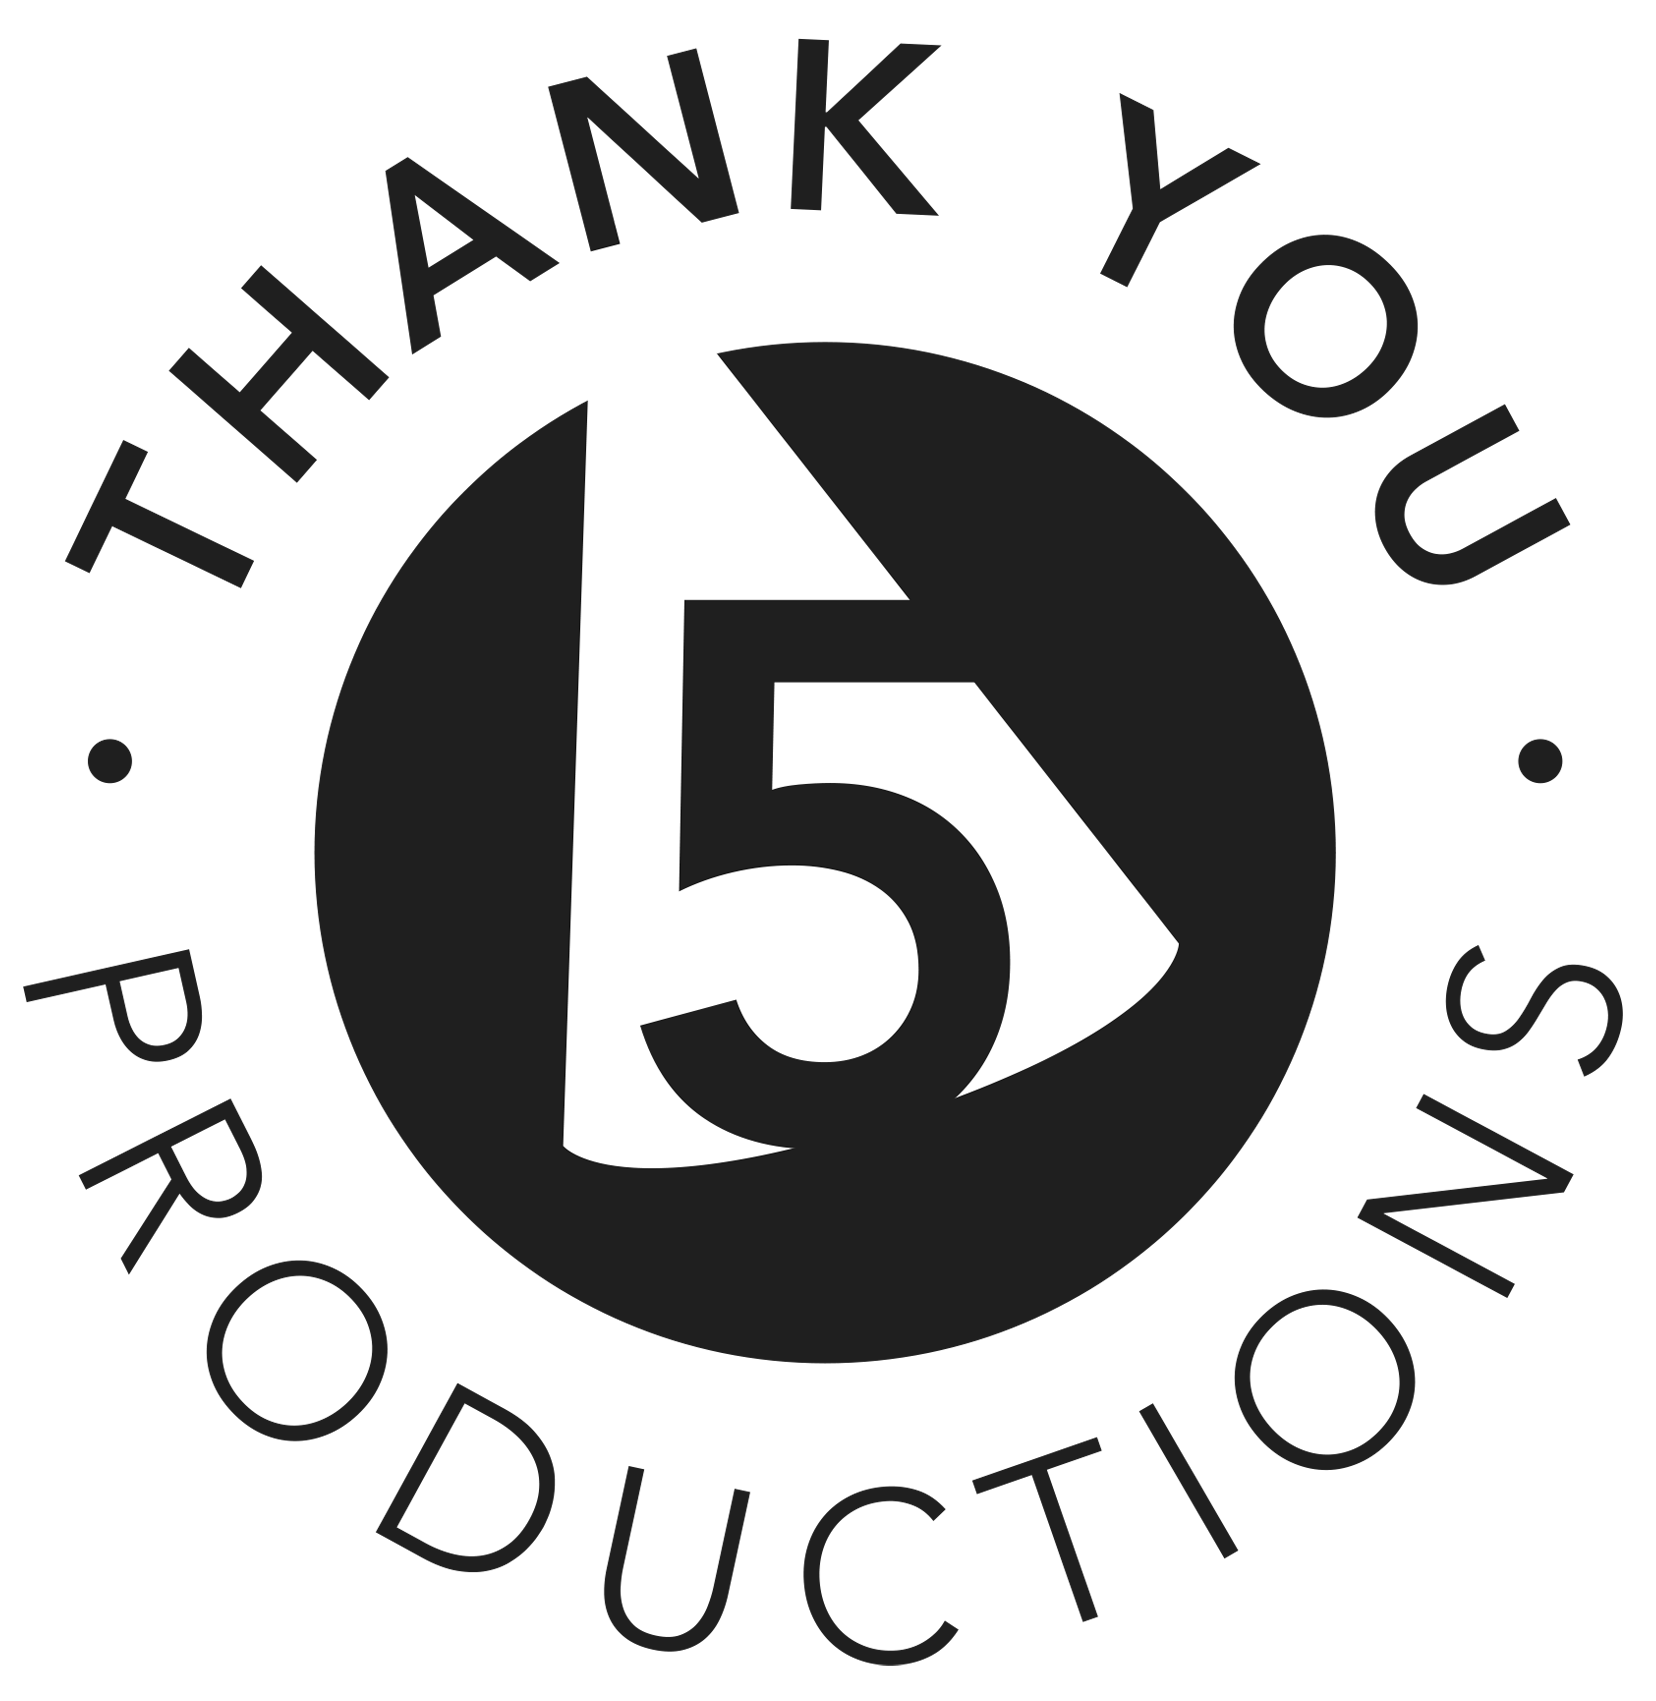 Thank-You-Five-Productions-Logo.png